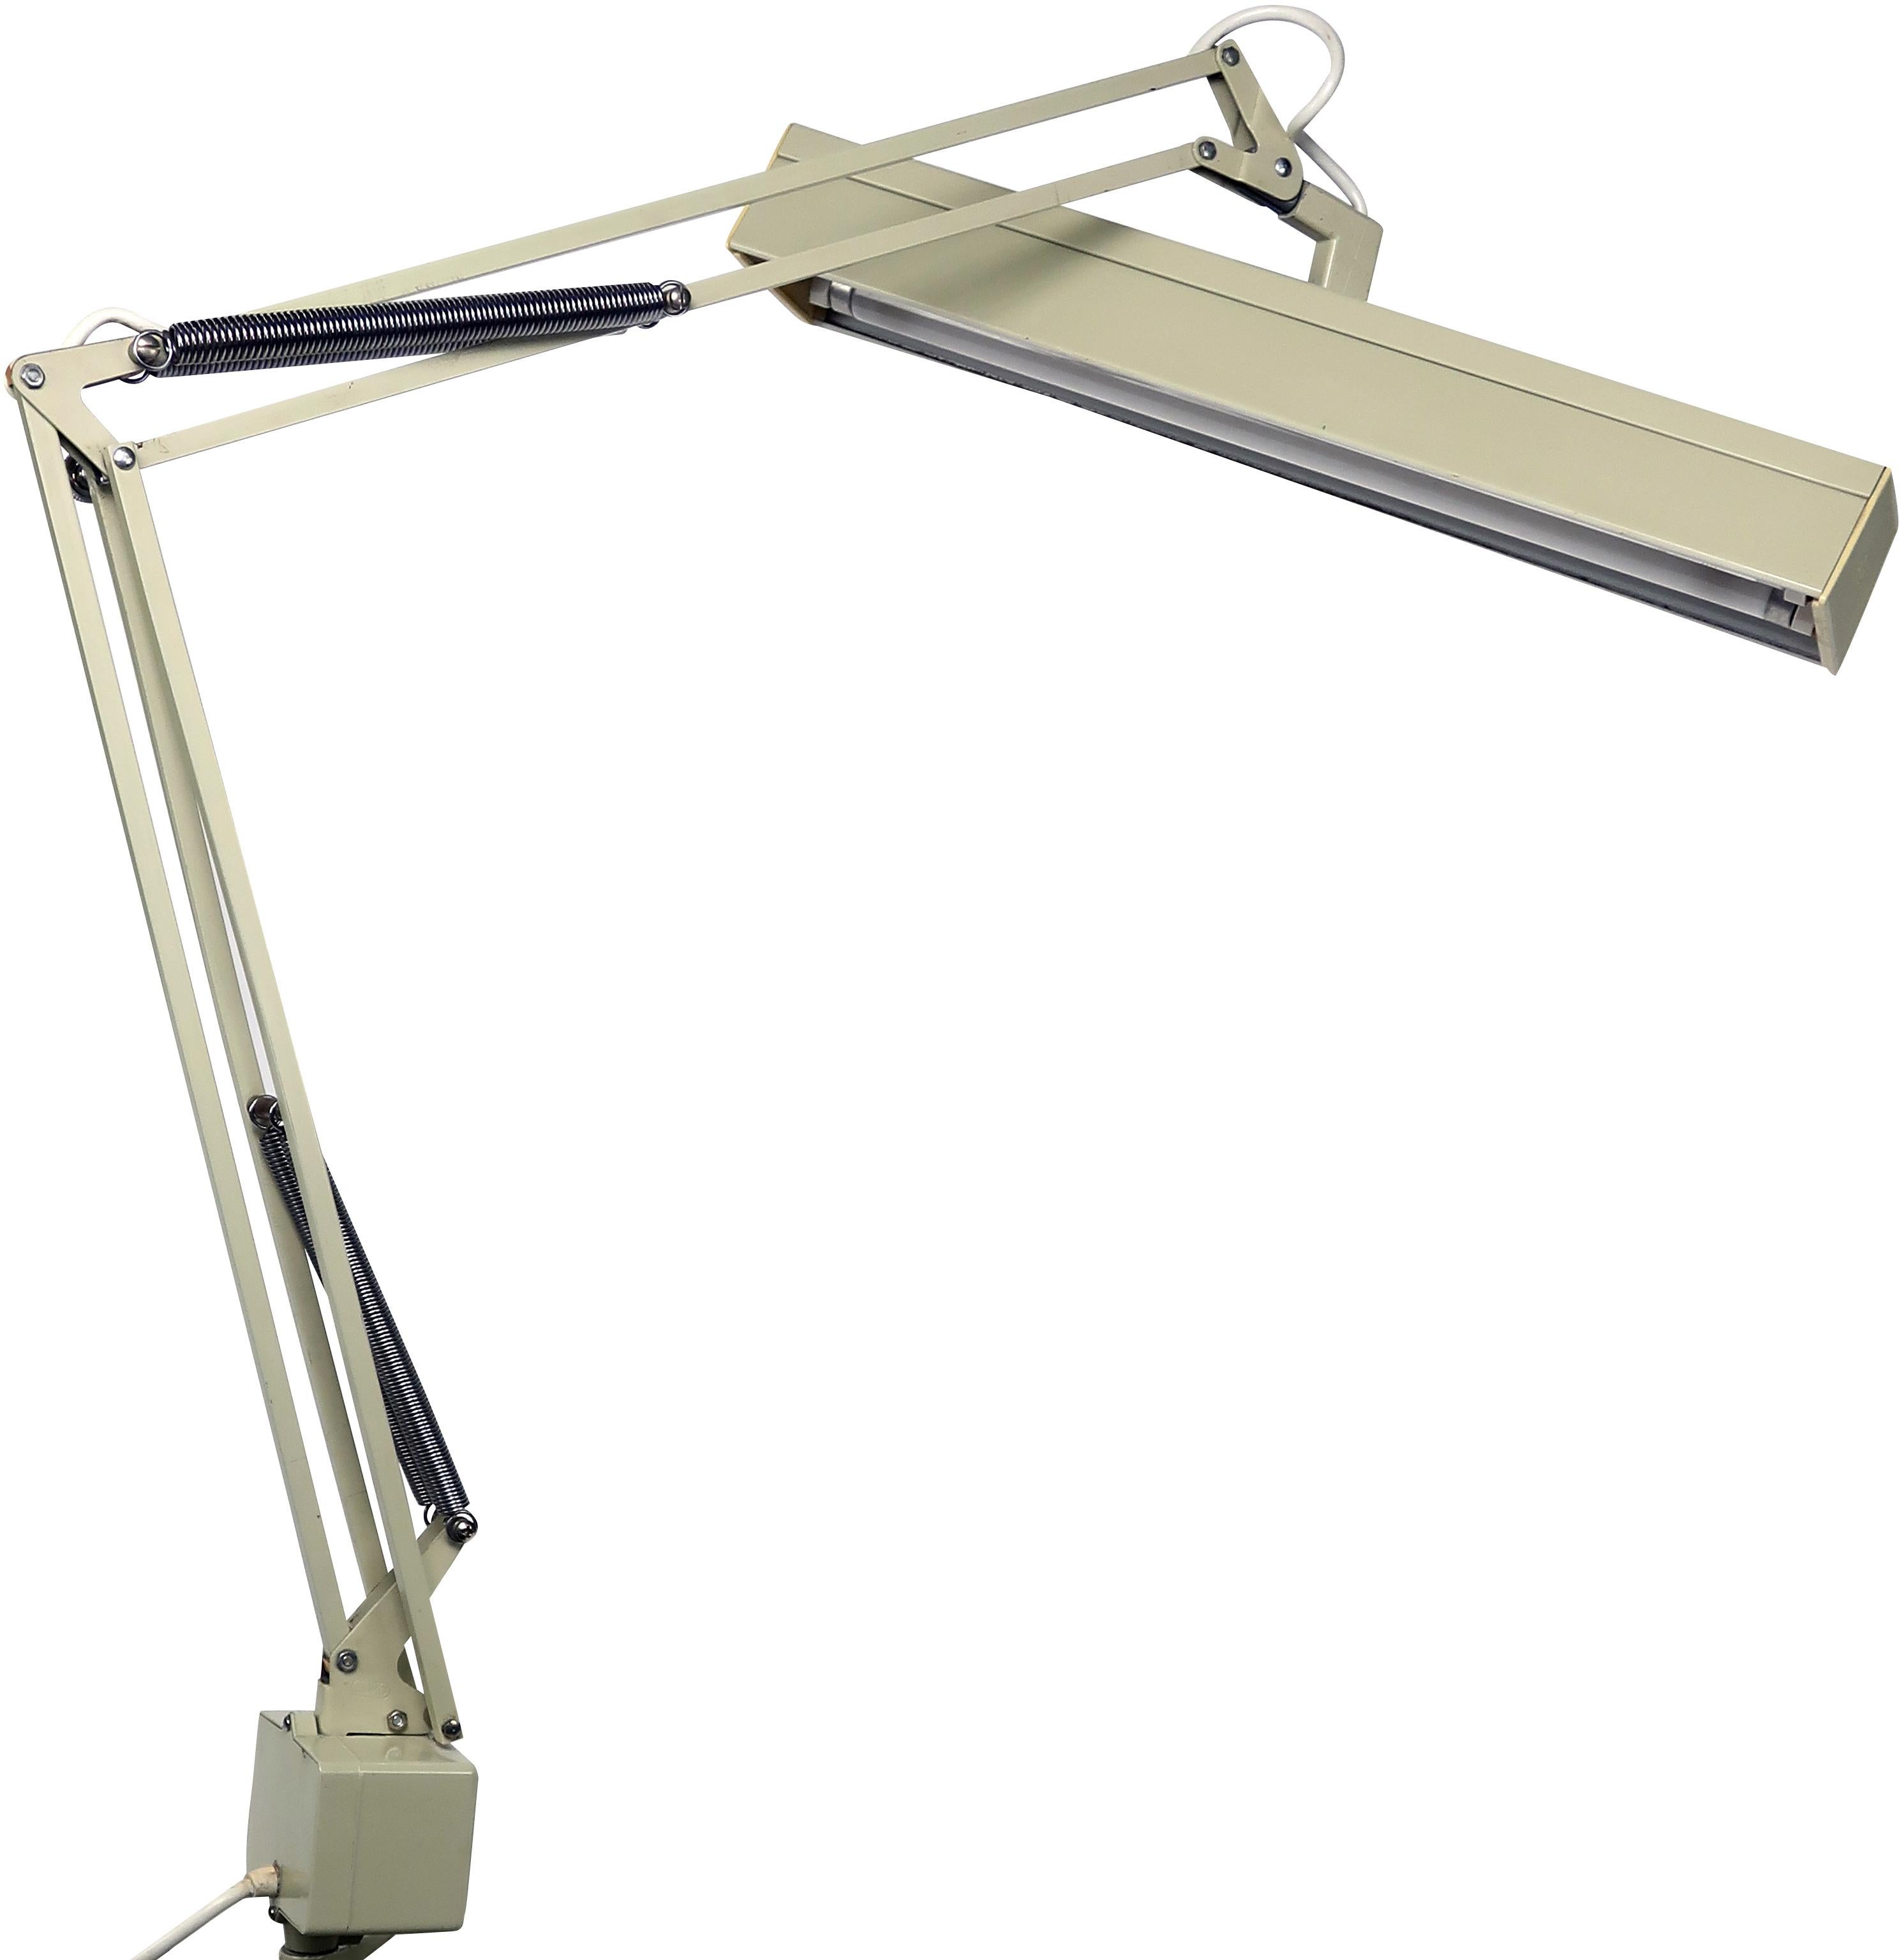 A vintage cream colored Luxo fluorescent desk lamp that screams mid-Century Modern. In excellent vintage condition with wear consistent with age and use. 

Measures: 19” x 16” x 34”
Extends to 19” x 16” x 44”.